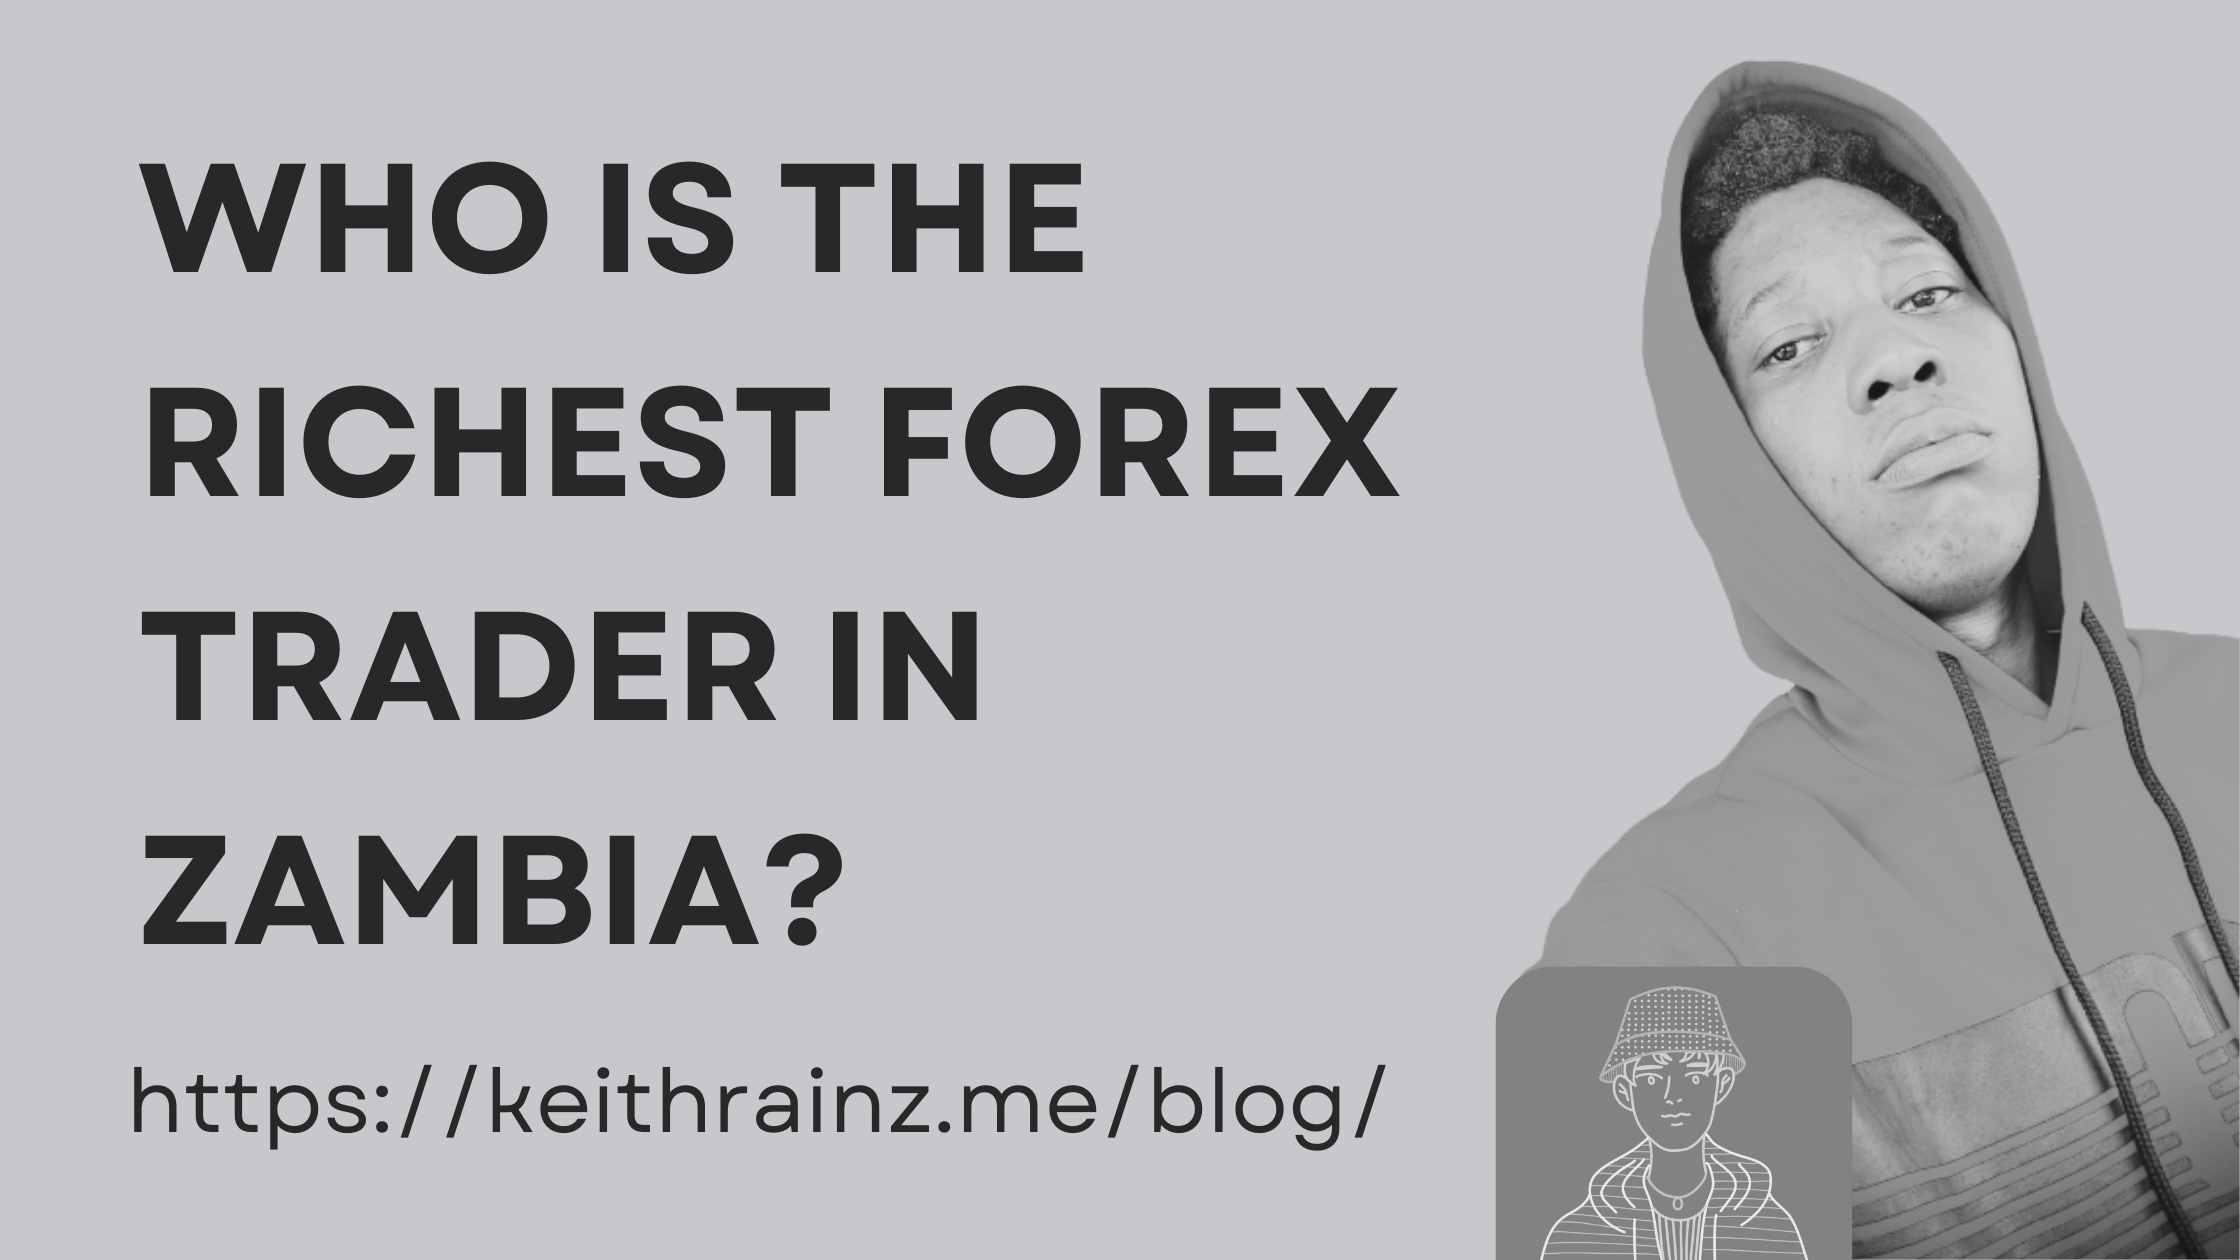 Who is the richest forex trader in Zambia